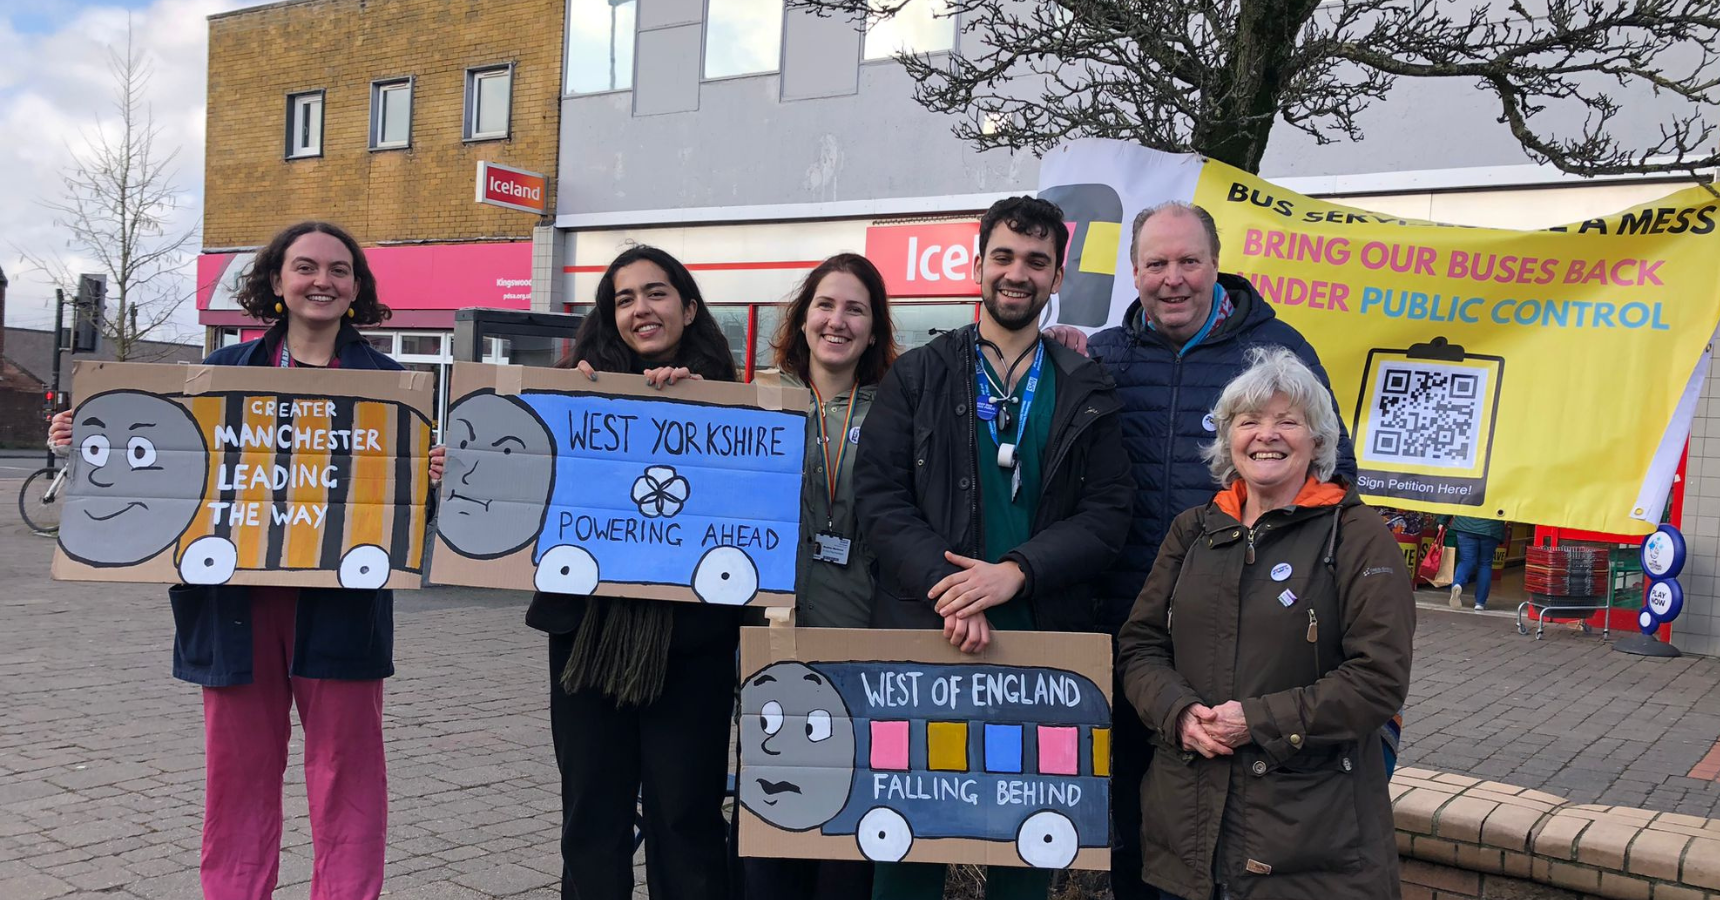 Medact Bristol health workers and local campaigners smiling at the camera in a group photo. They hold three placards with cartoon trains that read: "Greater Manchester leading the way", "West Yorkshire powering ahead", "West of England falling behind"